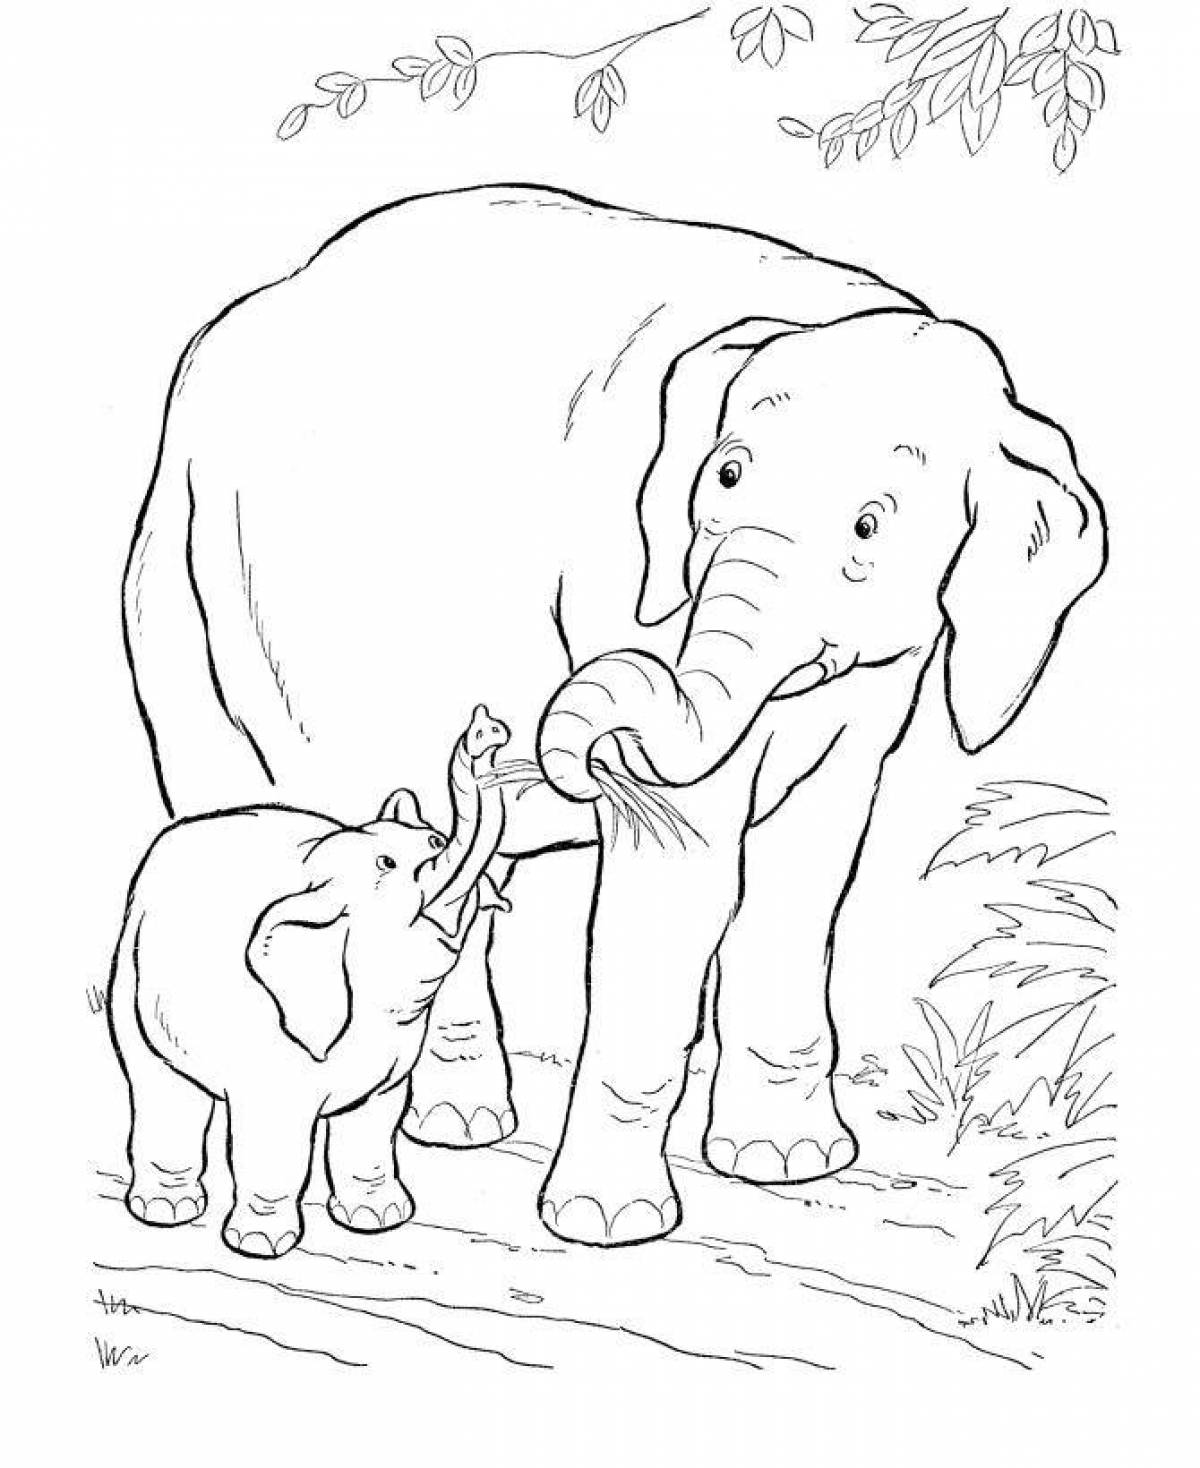 Animated wild animal and baby coloring page